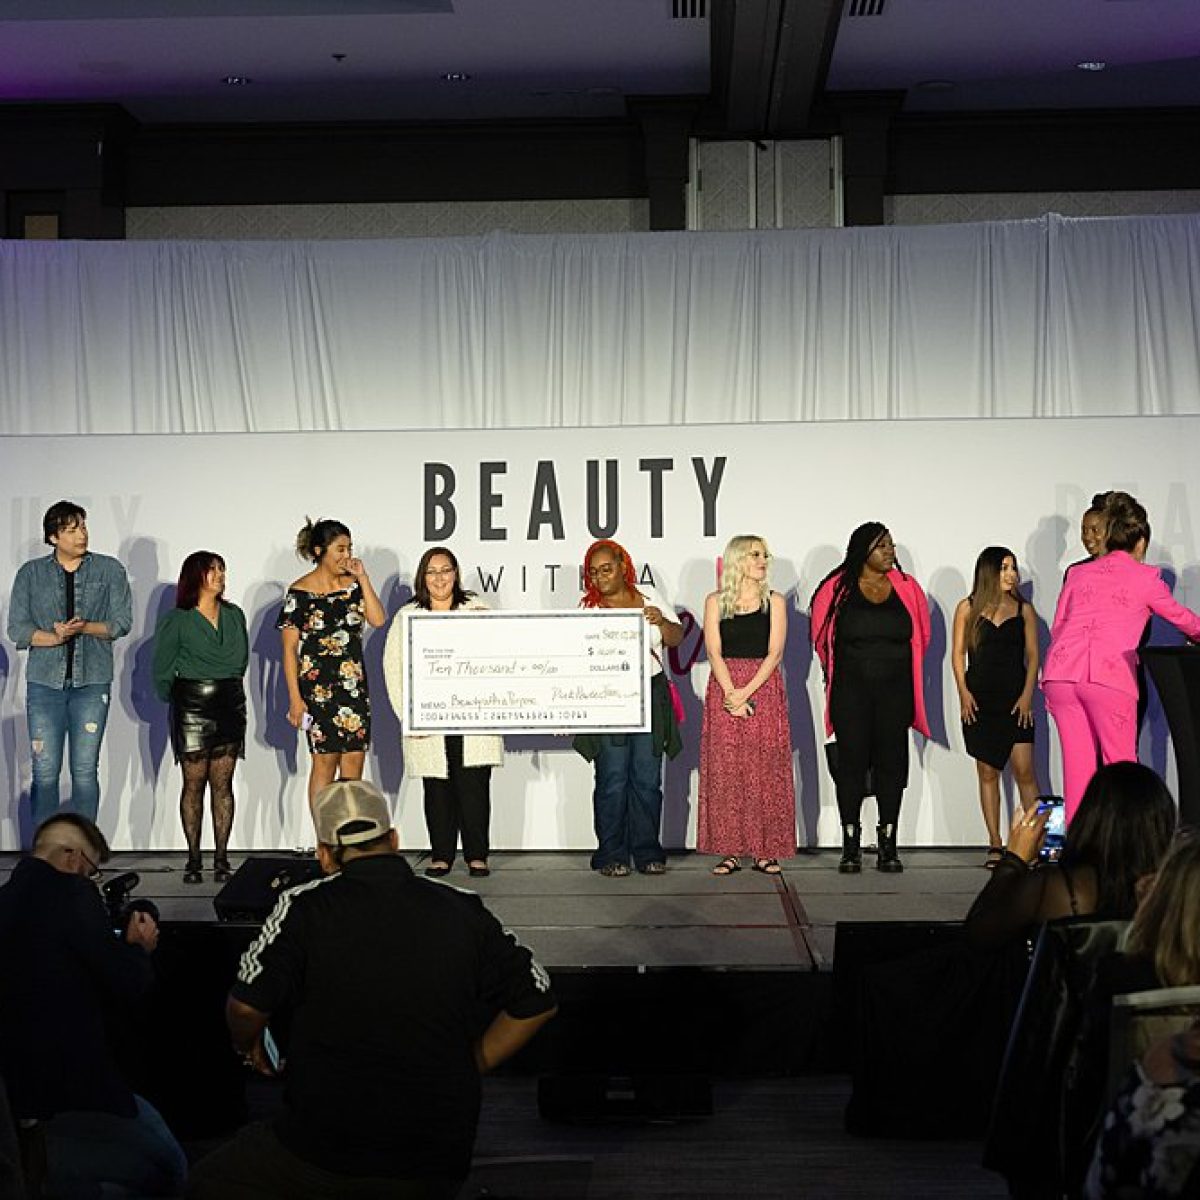 Telemundo highlights Beauty Gives Back Event helping Beauty Professionals